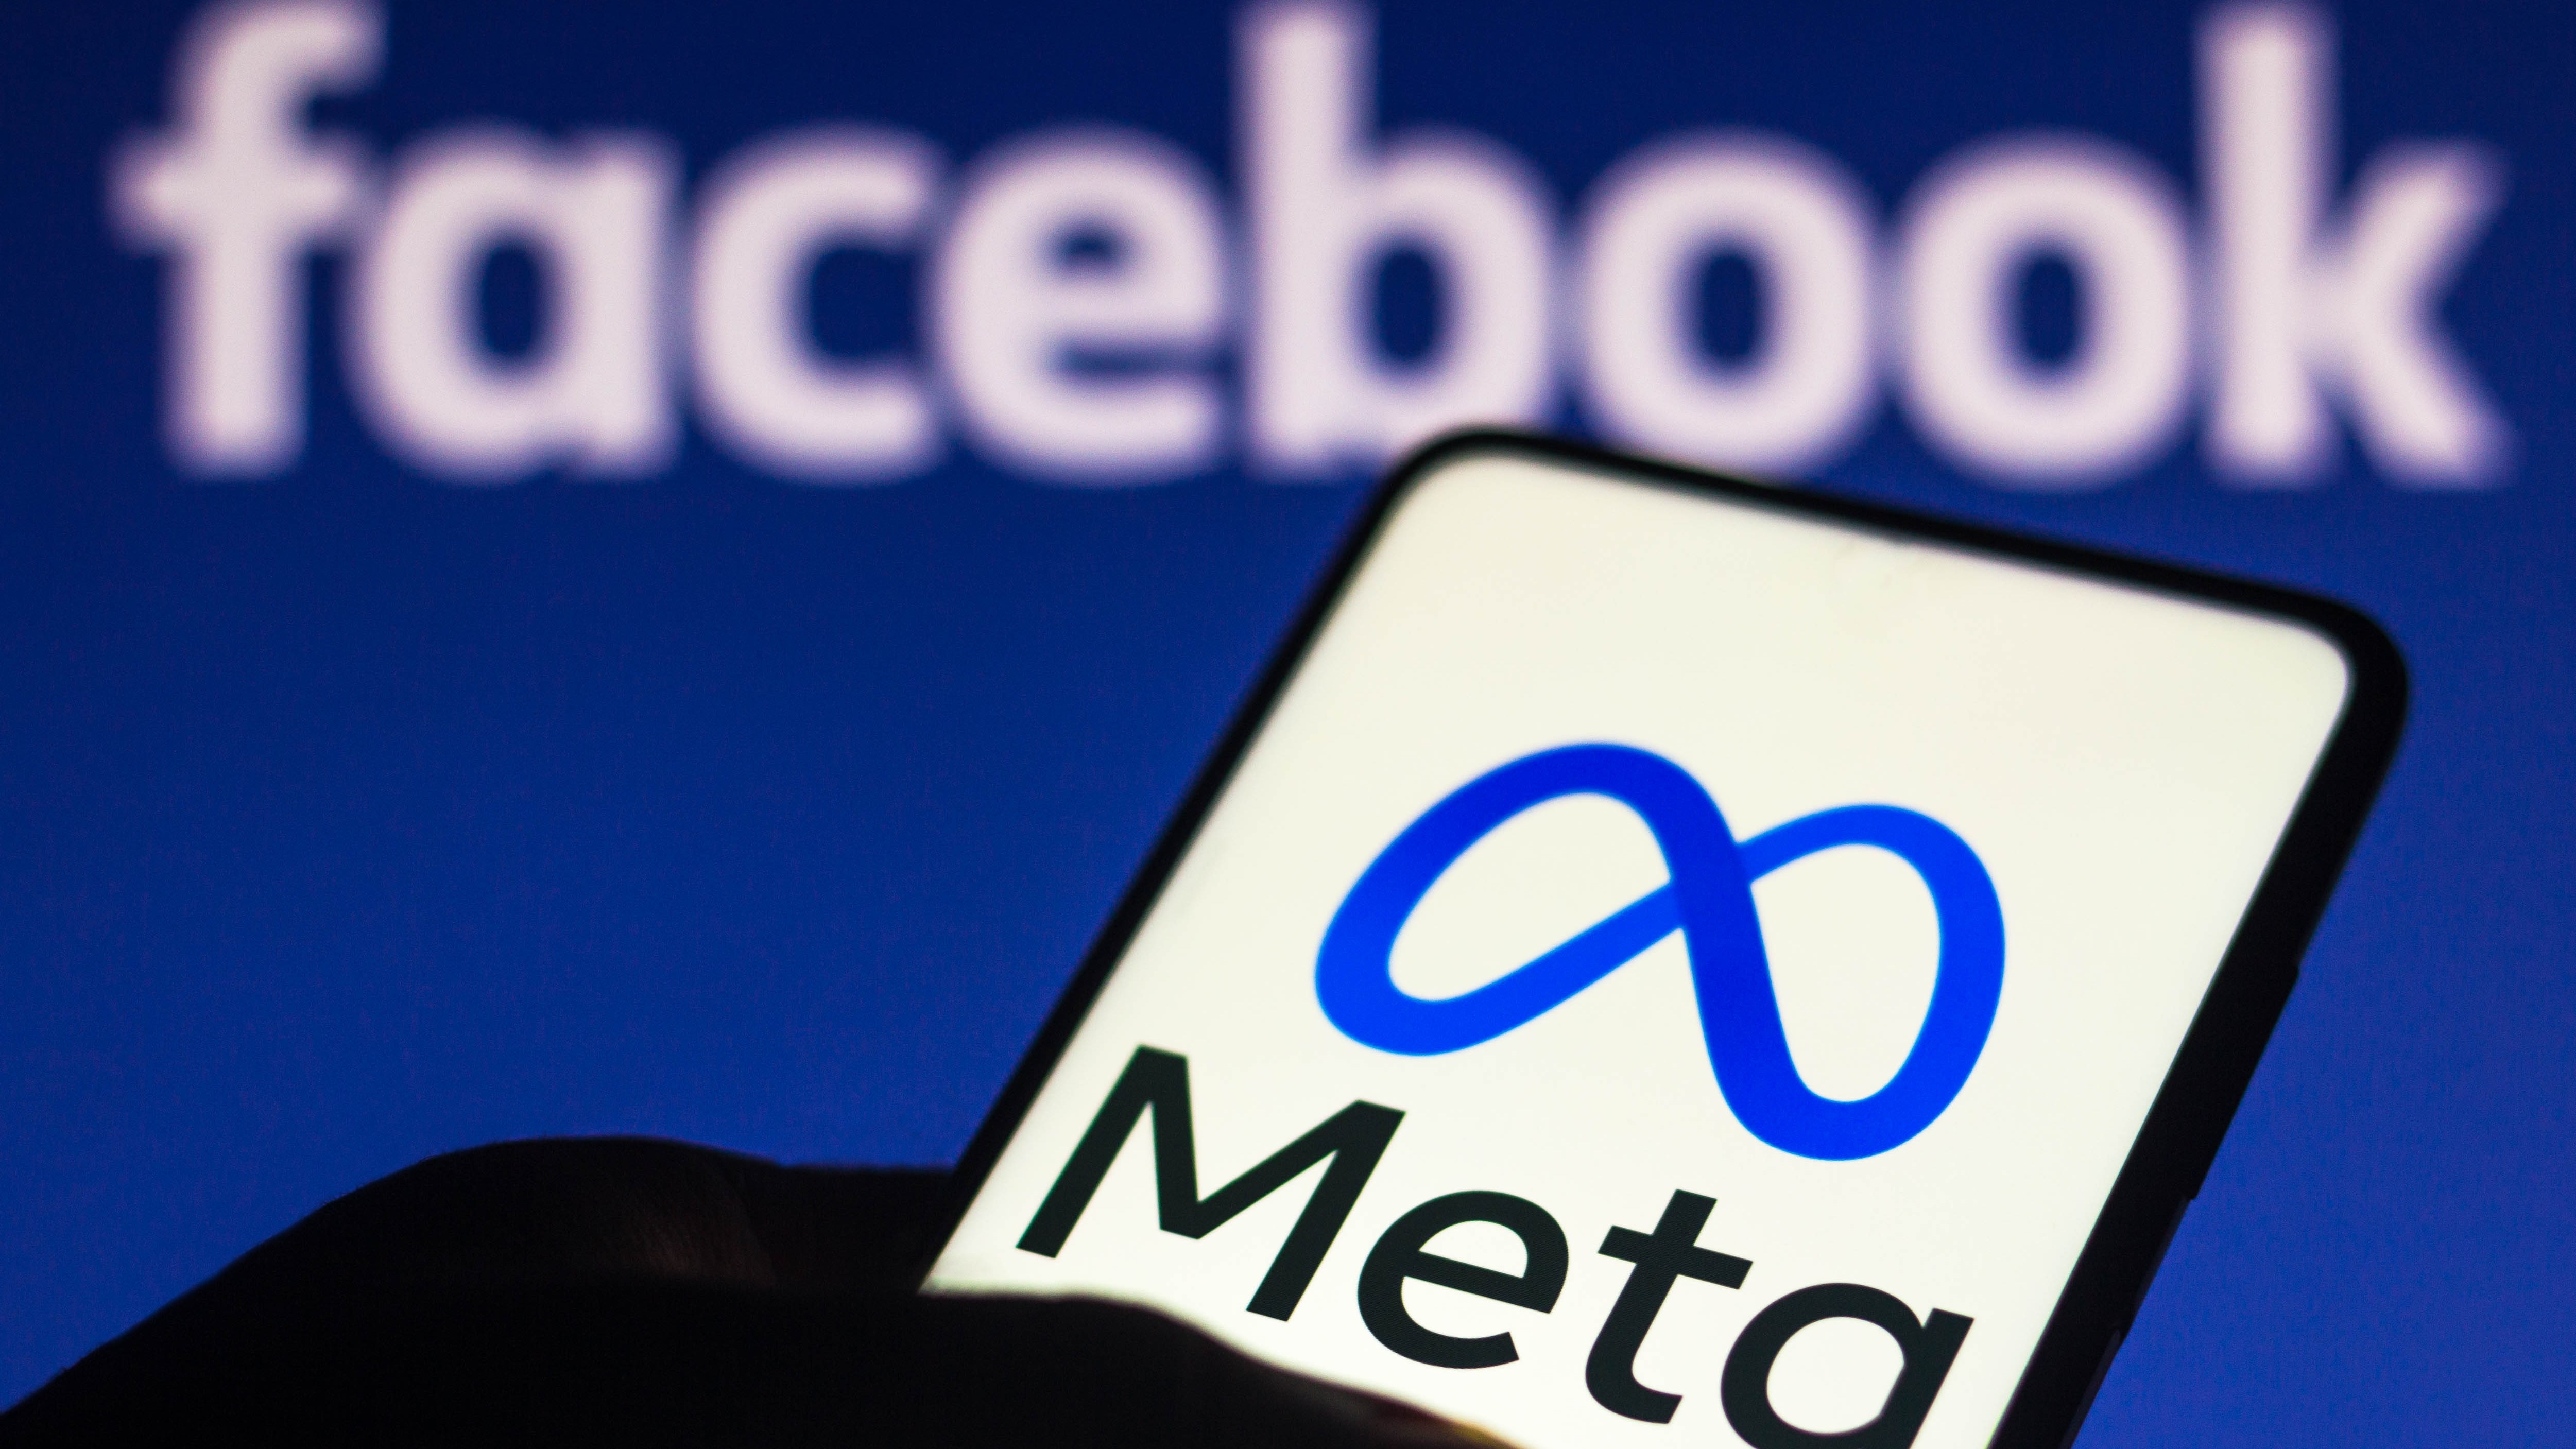 The Meta logo on a smartphone in front of the Facebook logo a little bit blurred in the background